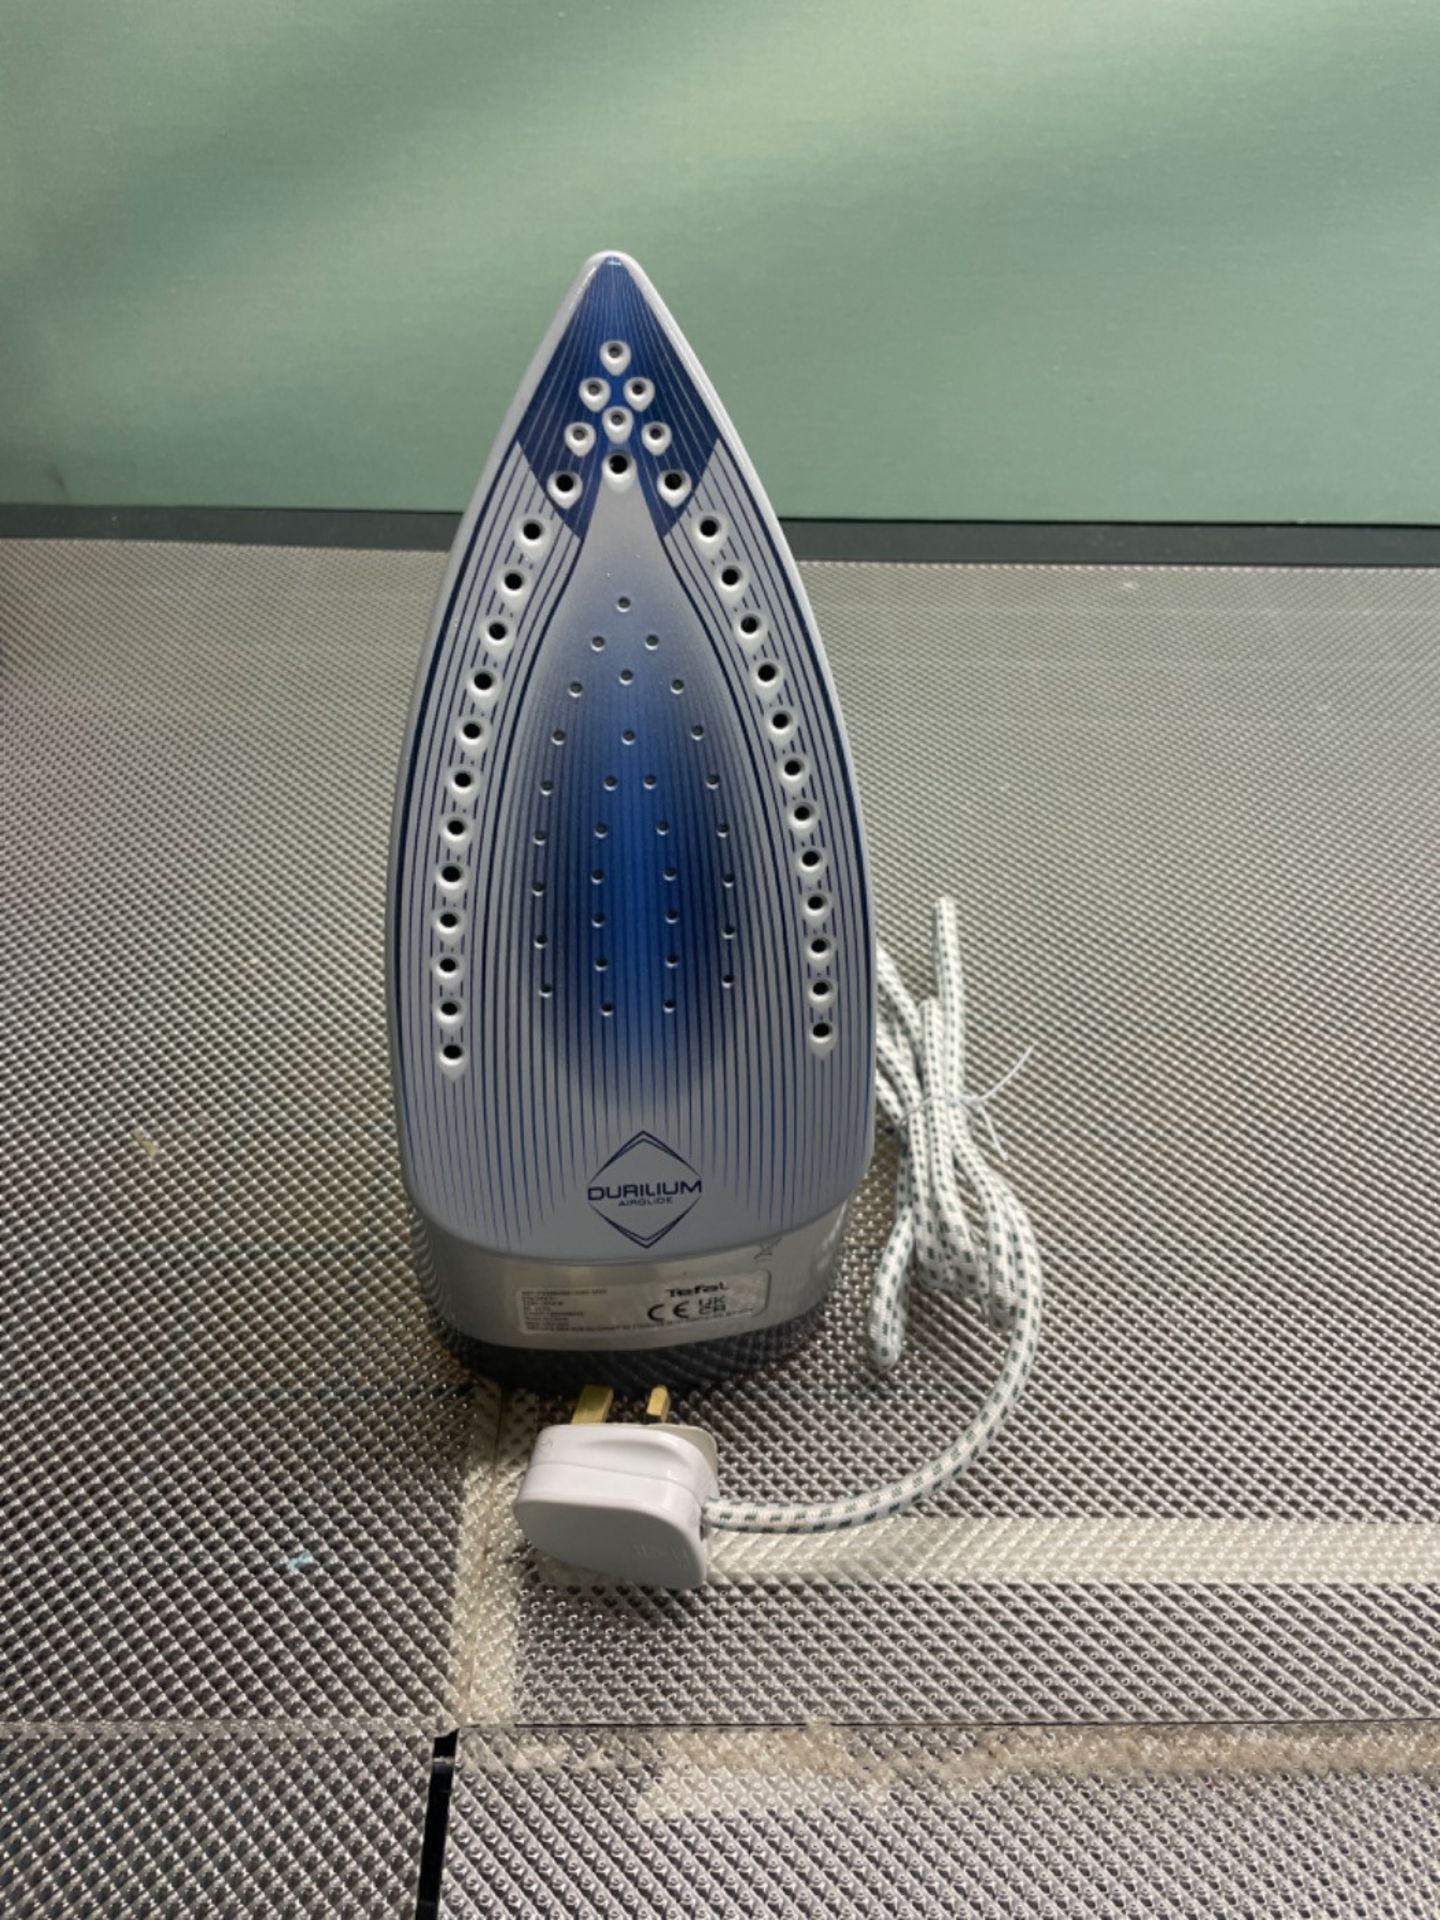 Tefal Steam Iron, Express Steam, 2600 watts, Blue and Grey, FV2882, 0.27L - Image 3 of 3